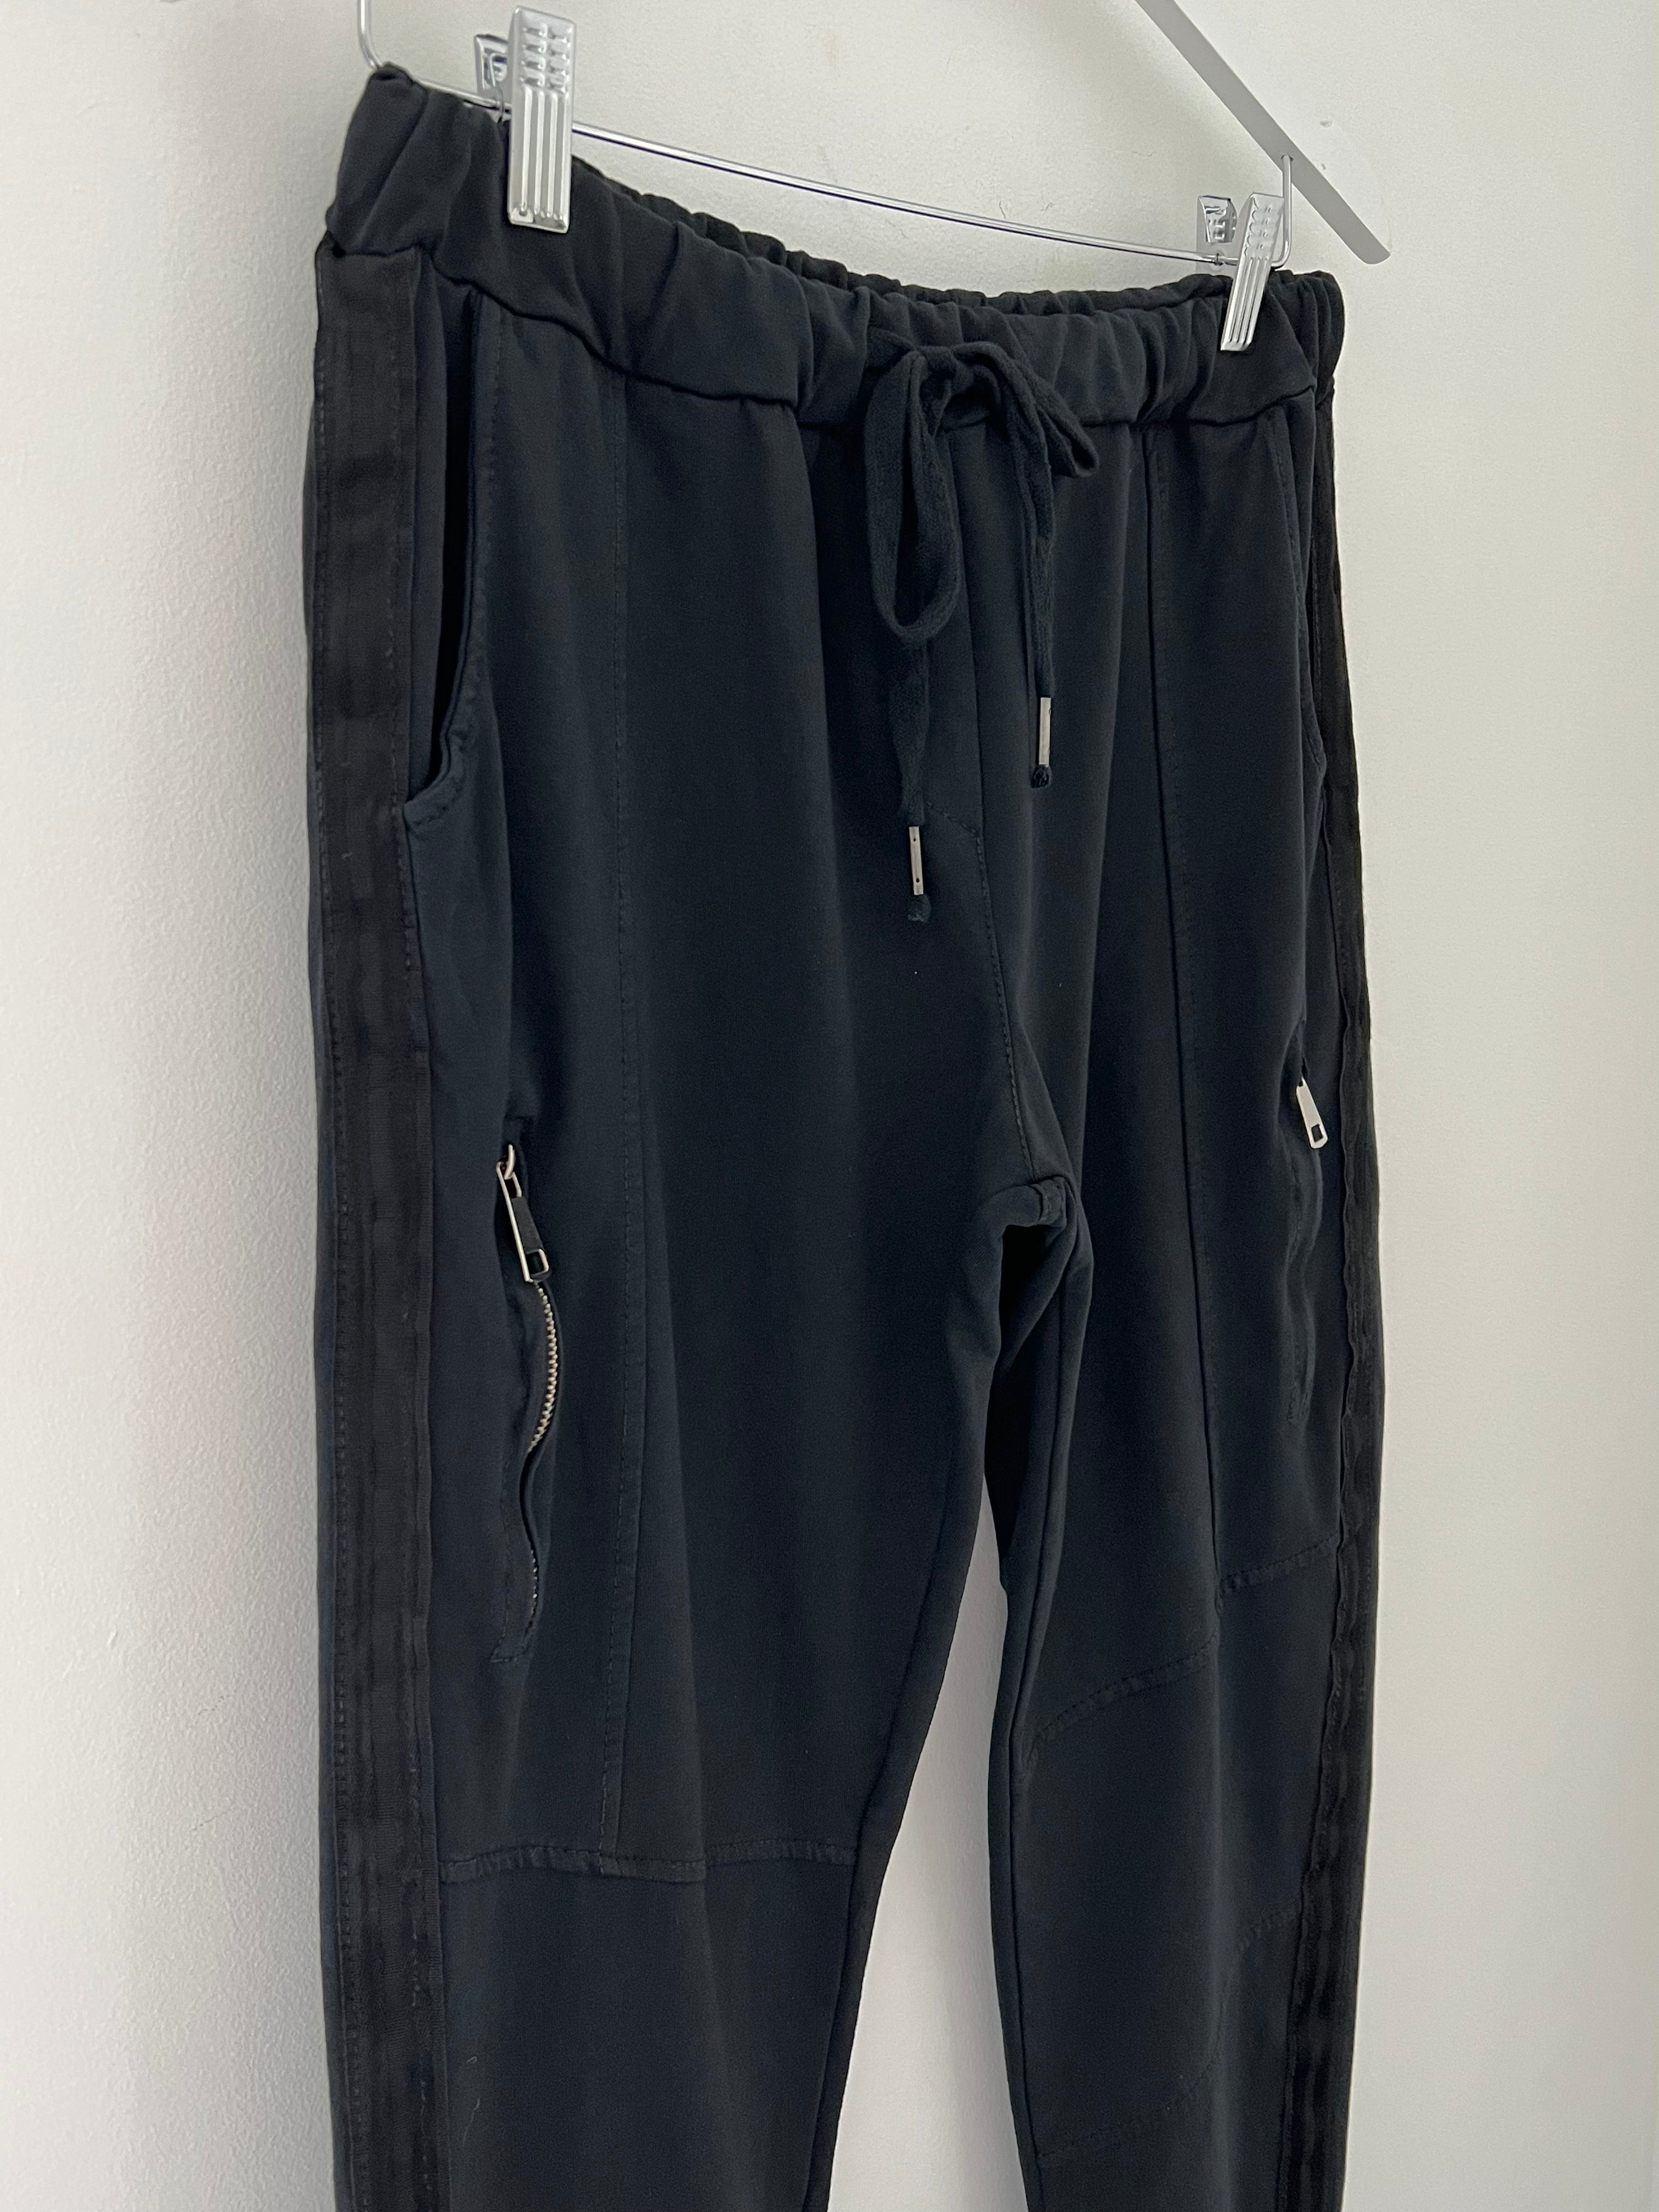 Jersey Stretch Joggers in Black